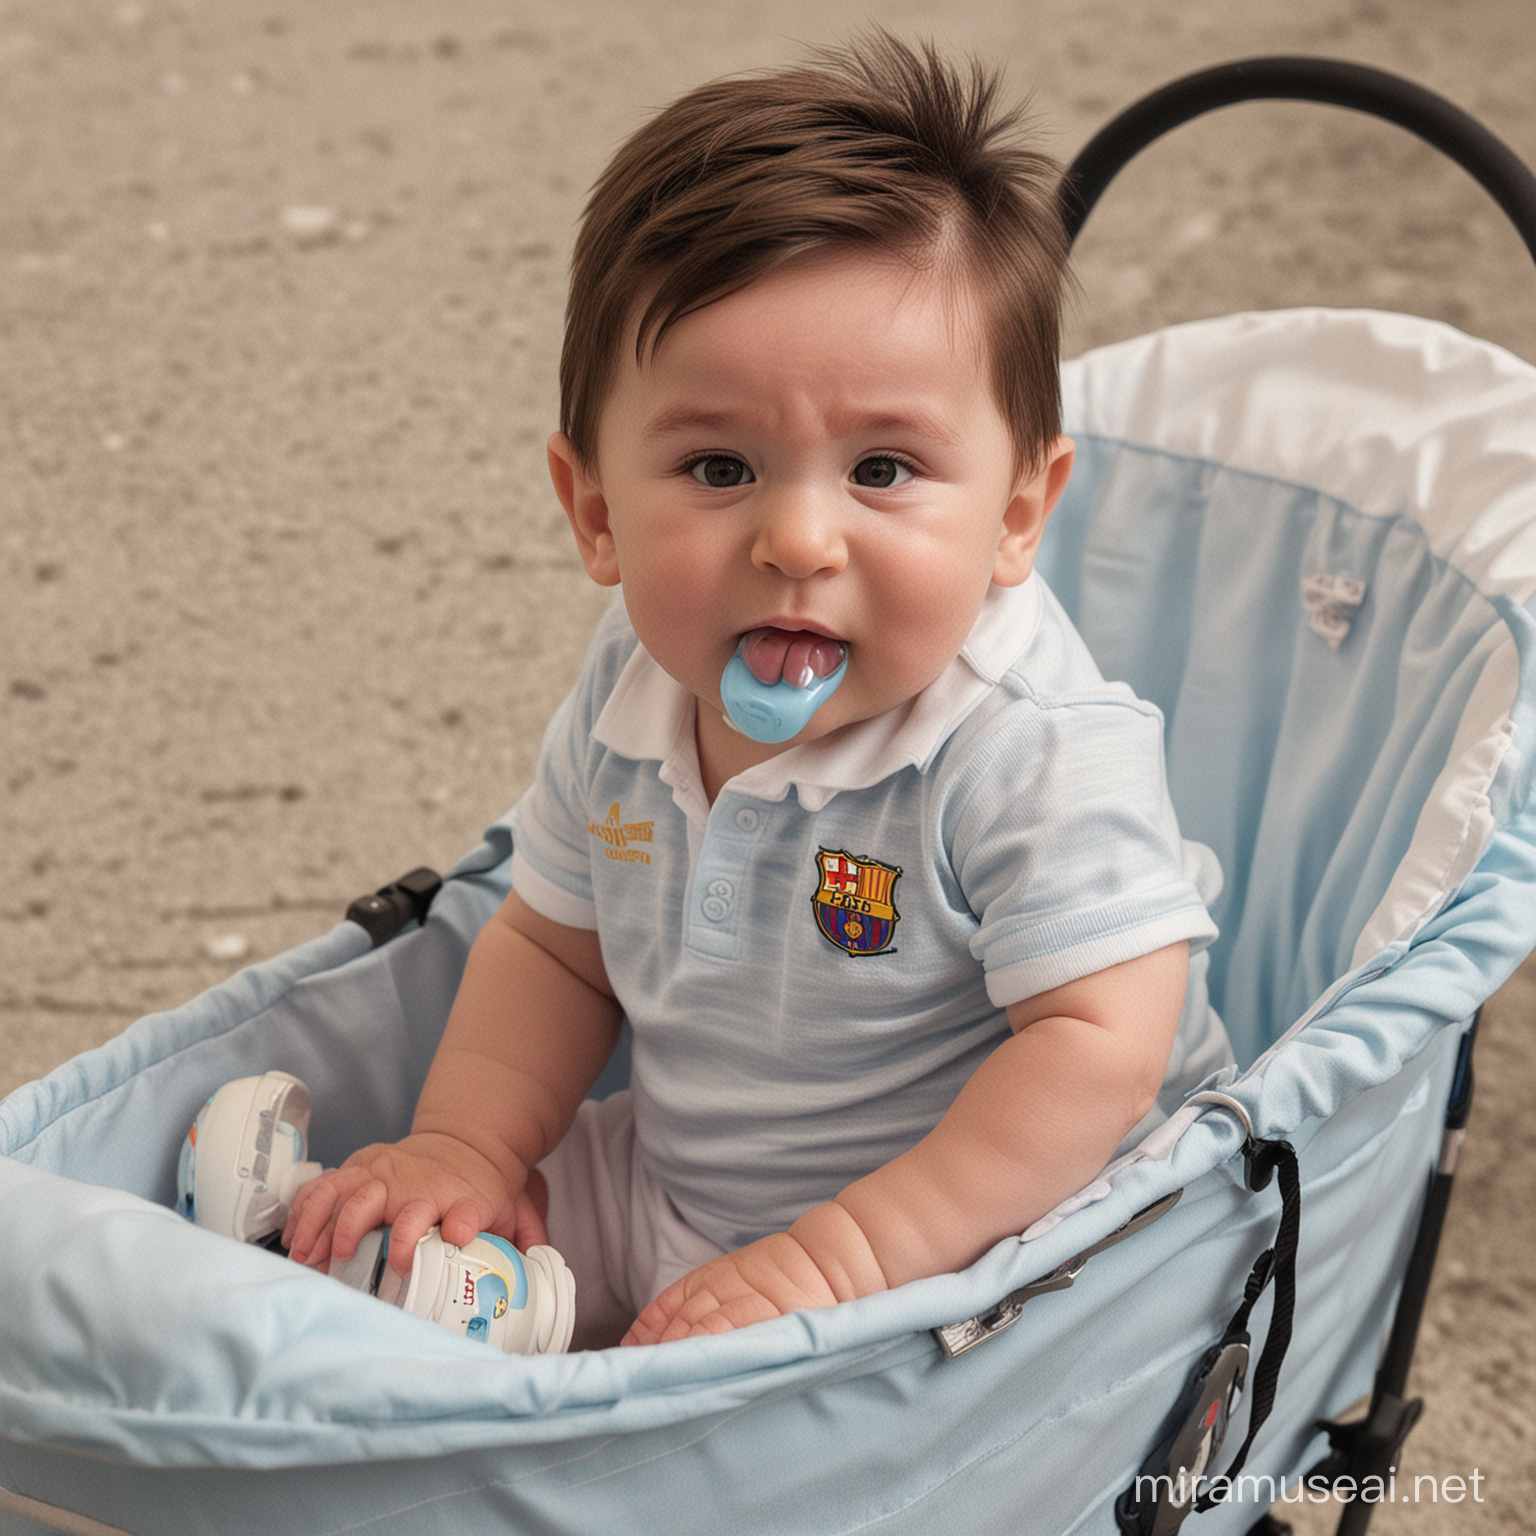 little lionel messi sitting in a pram using a pacifier